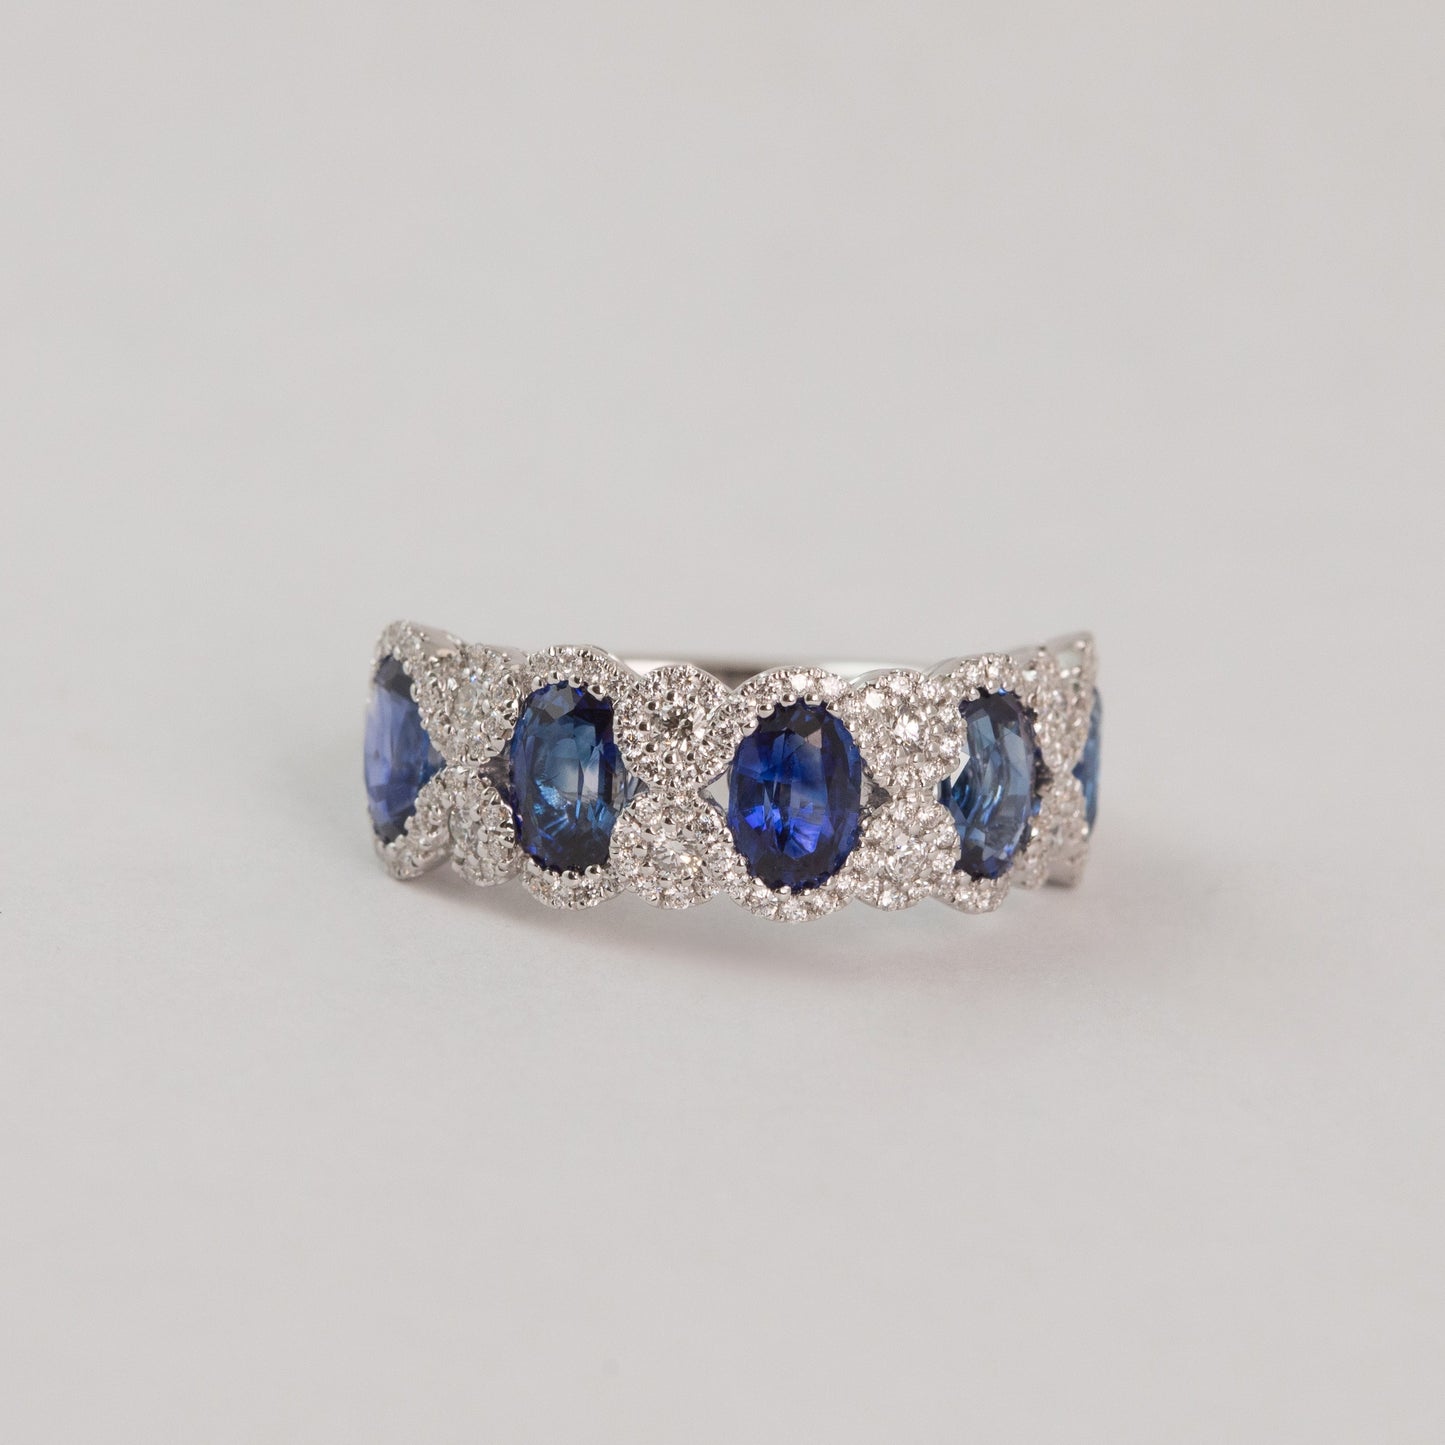 The Sapphire and Diamond Band Ring